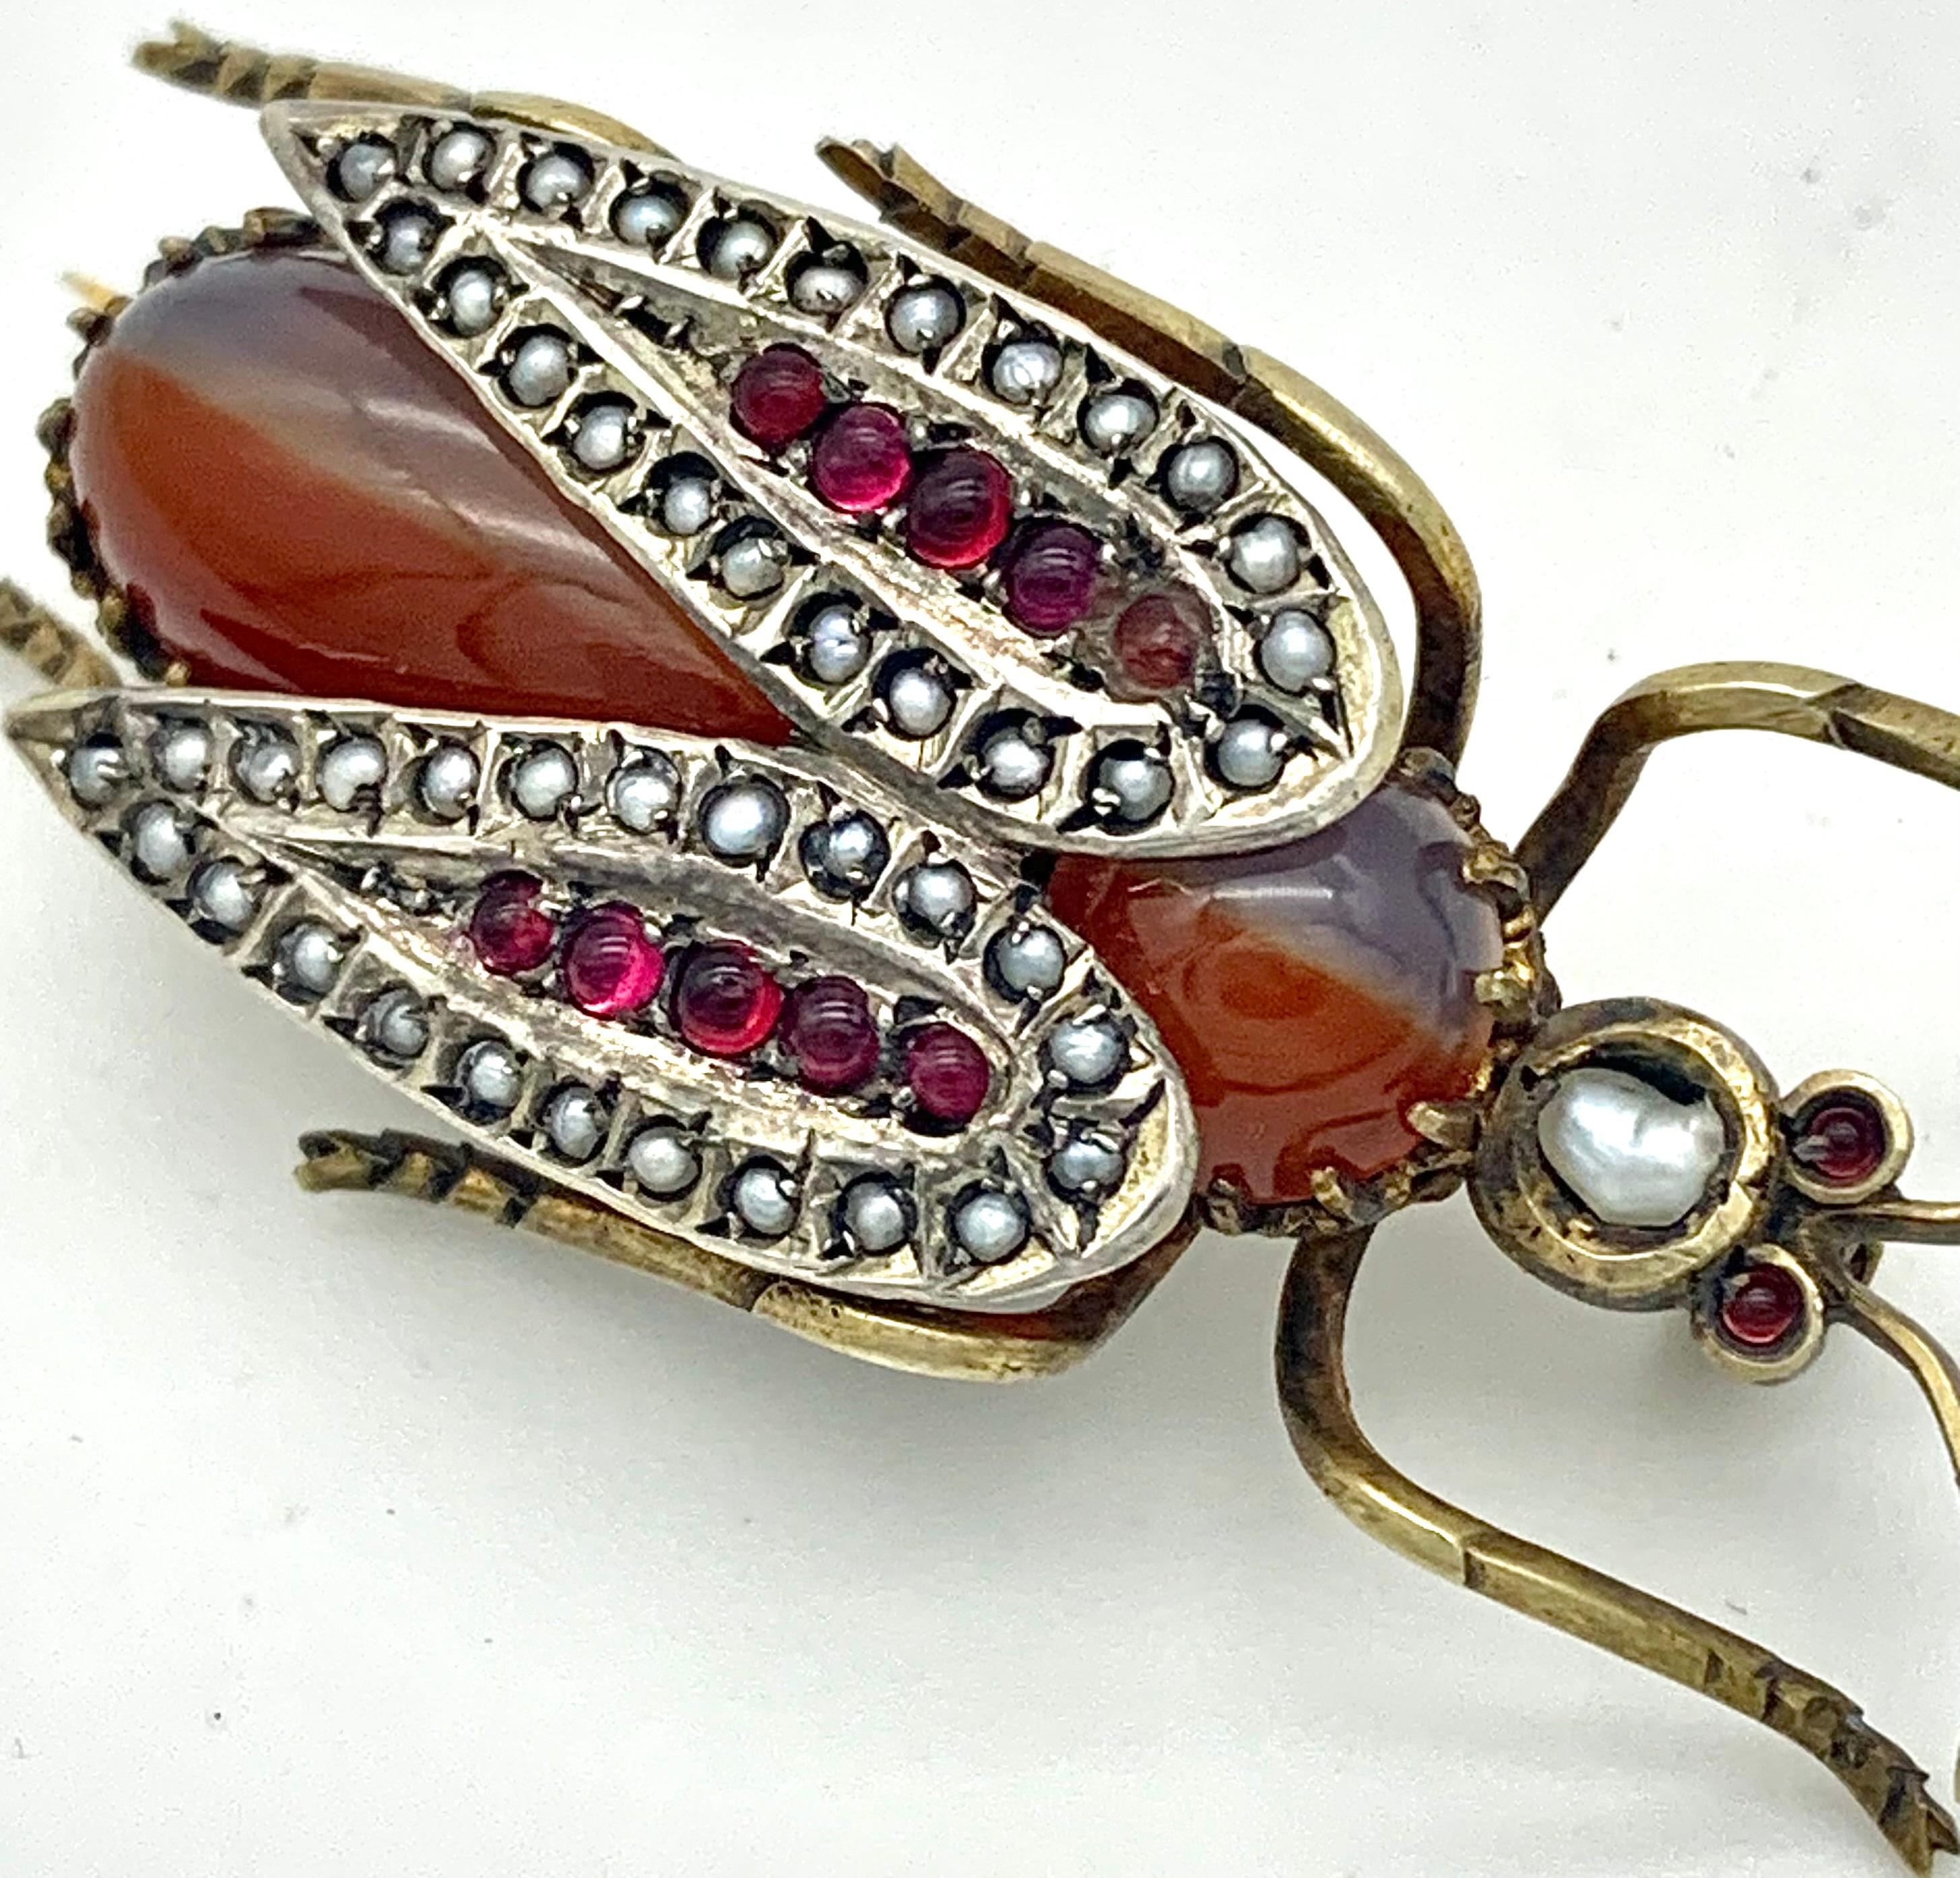 This expressive beetle with its cornelian body and its pearl and glass set wings will lead you the way to spring.